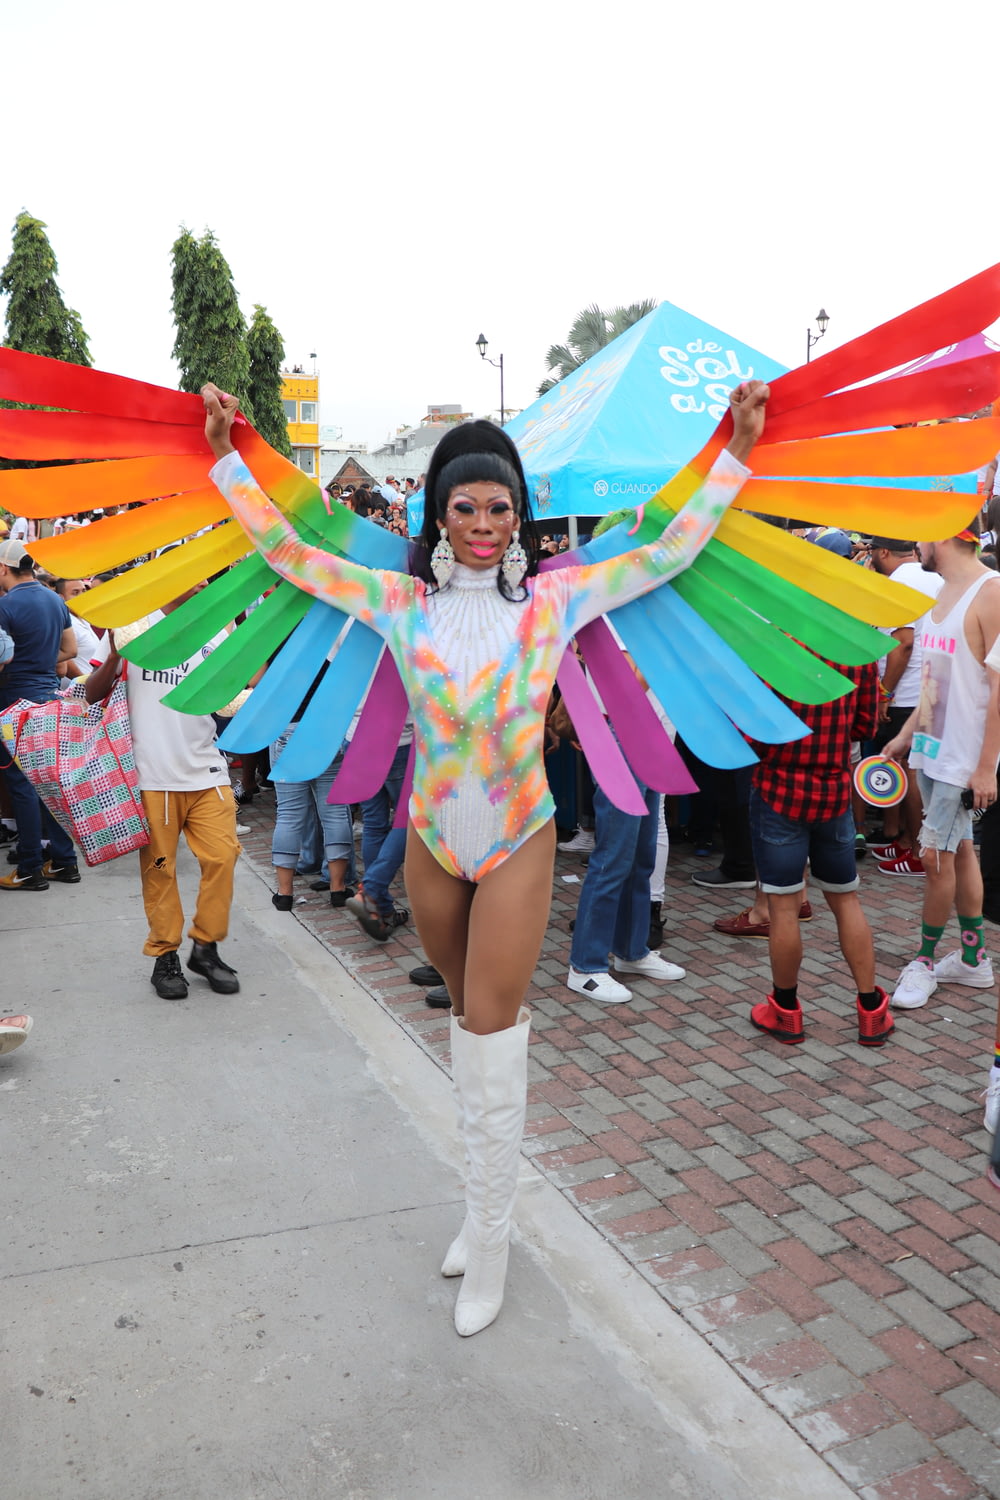 a woman in a colorful costume is holding a kite